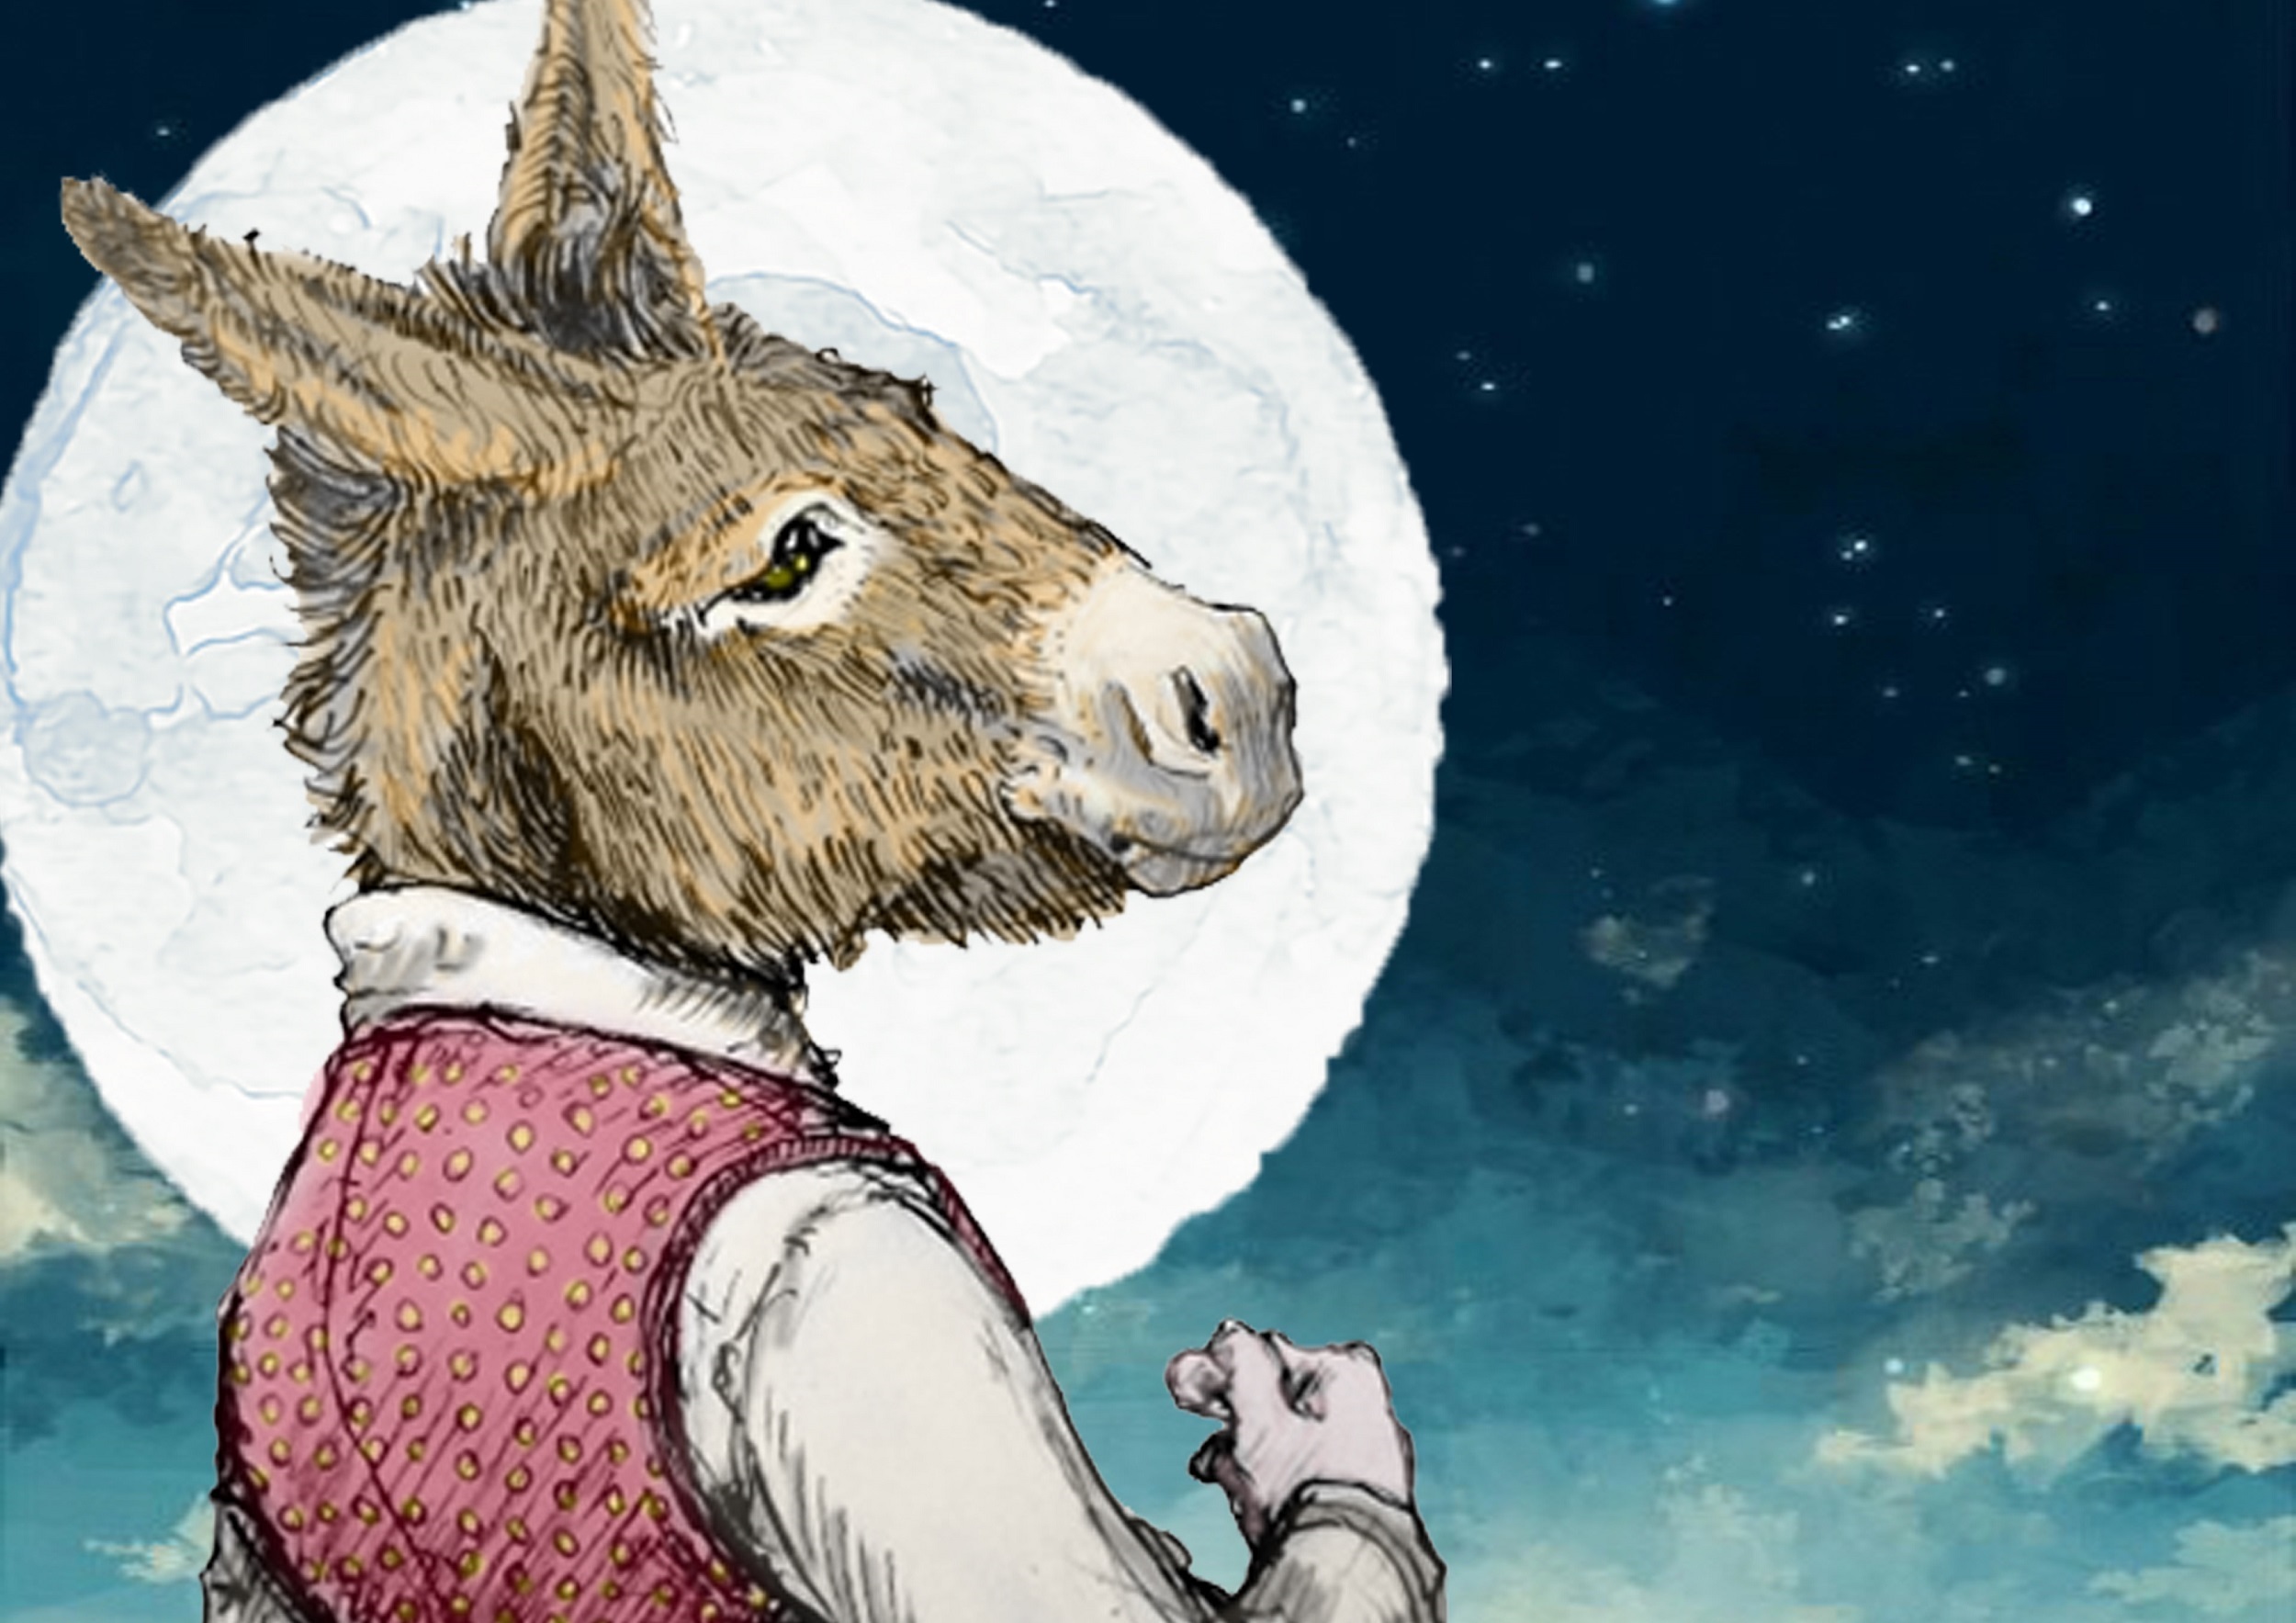 A Midsummer Night's Dream poster picture showing a donkey